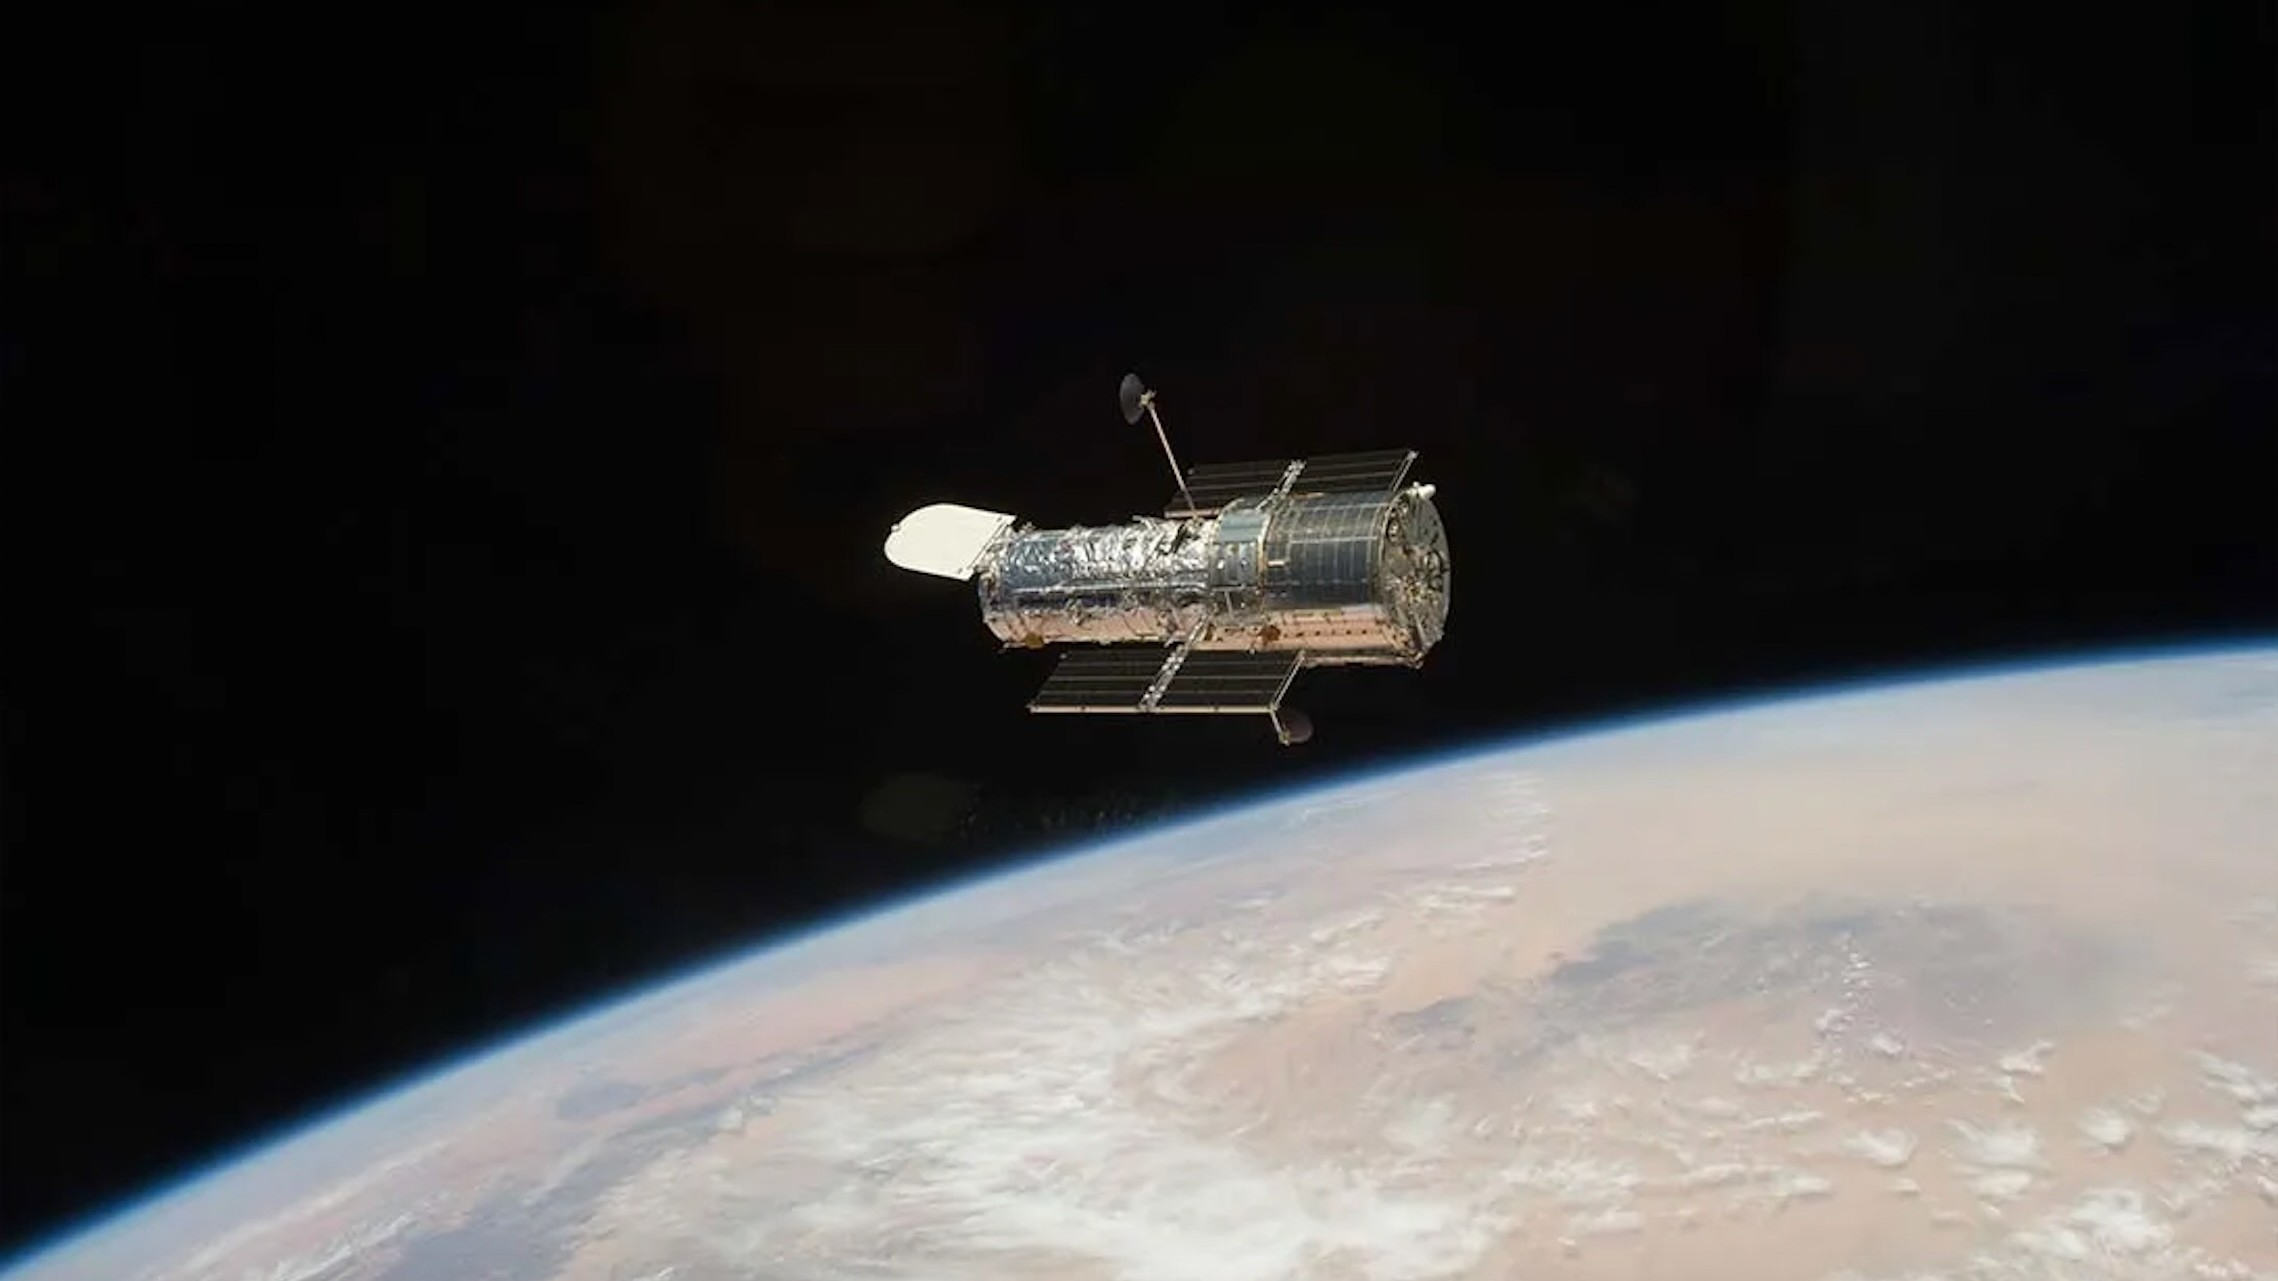 NASA will give a Hubble Telescope status update on June 4. Should we be worried? Space